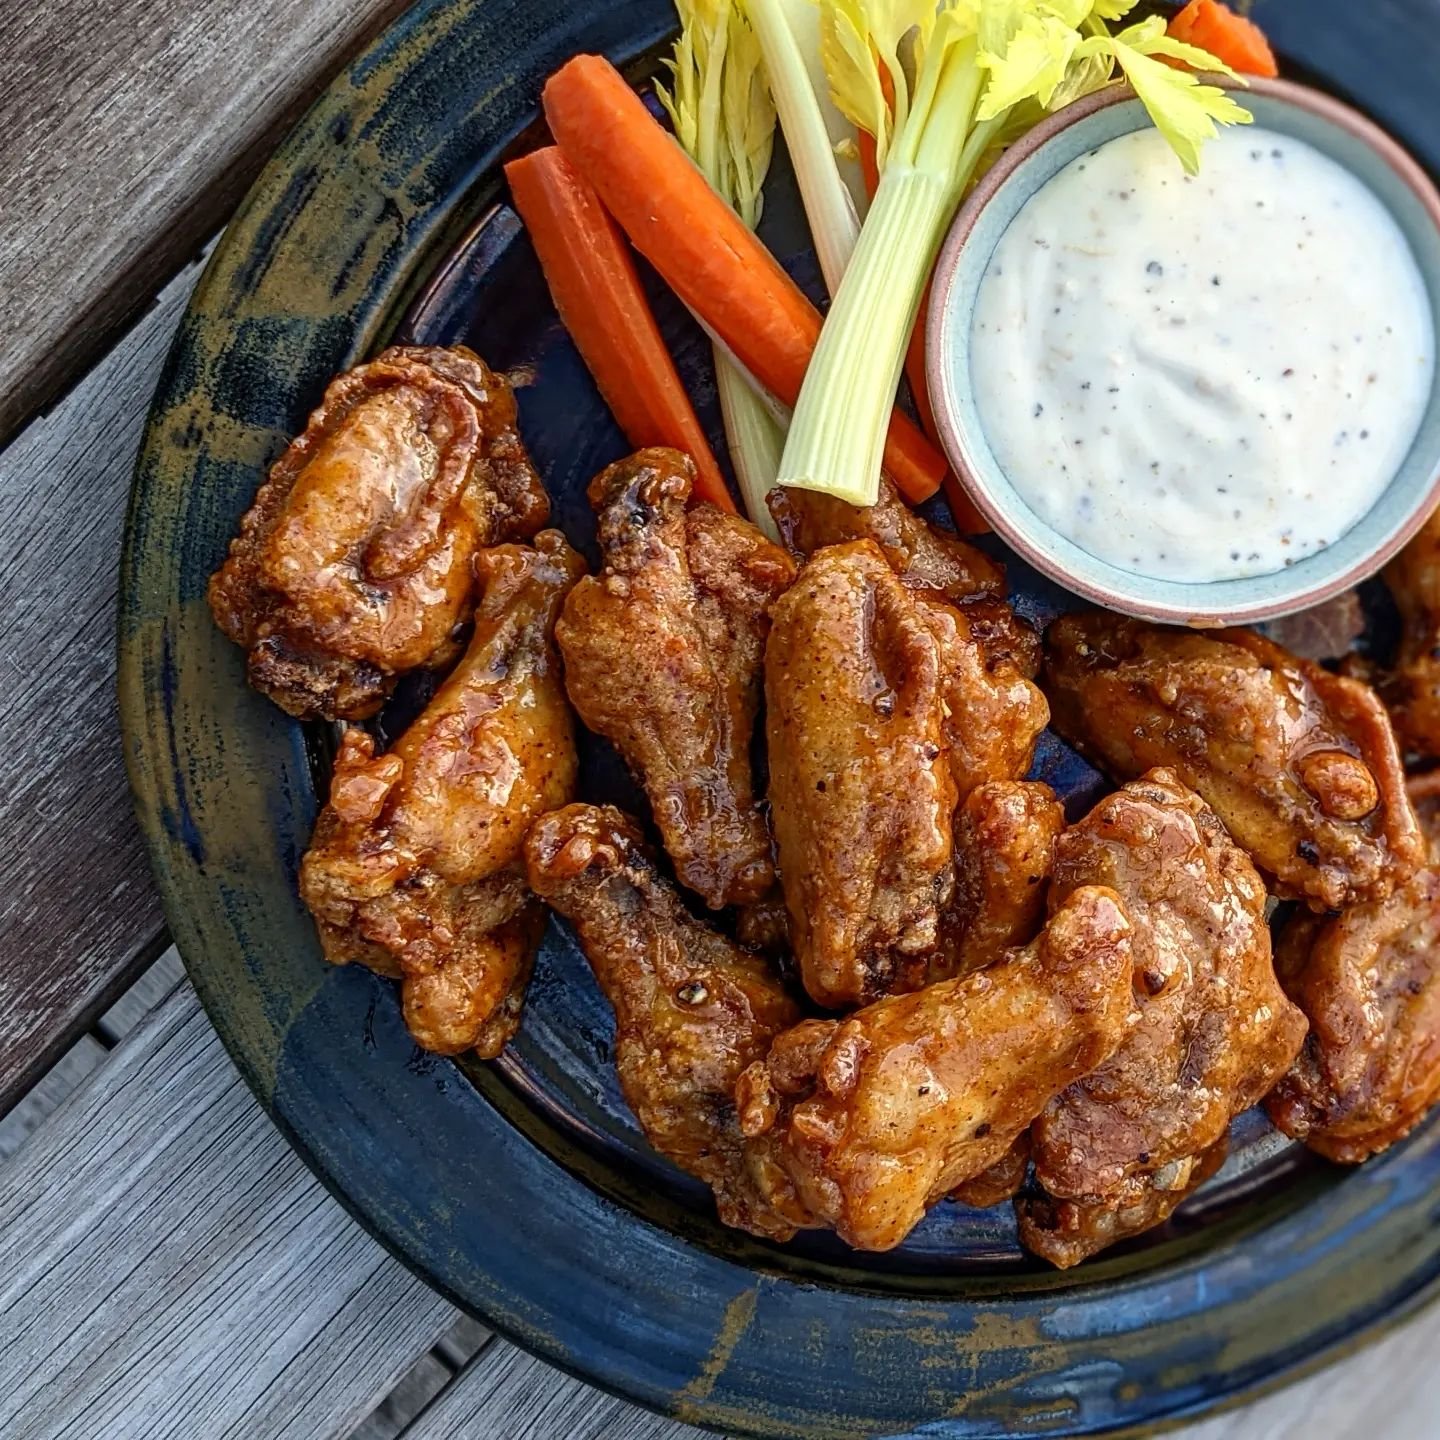 Our first-ever wing night is TMRW! 🍗🗓️ And while we'll be tossing wings in some classic flavours, we've got a few signature ones too.

This is our take on hot honey chicken wings: Mitmita honey butter (with ranch on the side).

Mitmita is an Ethiop